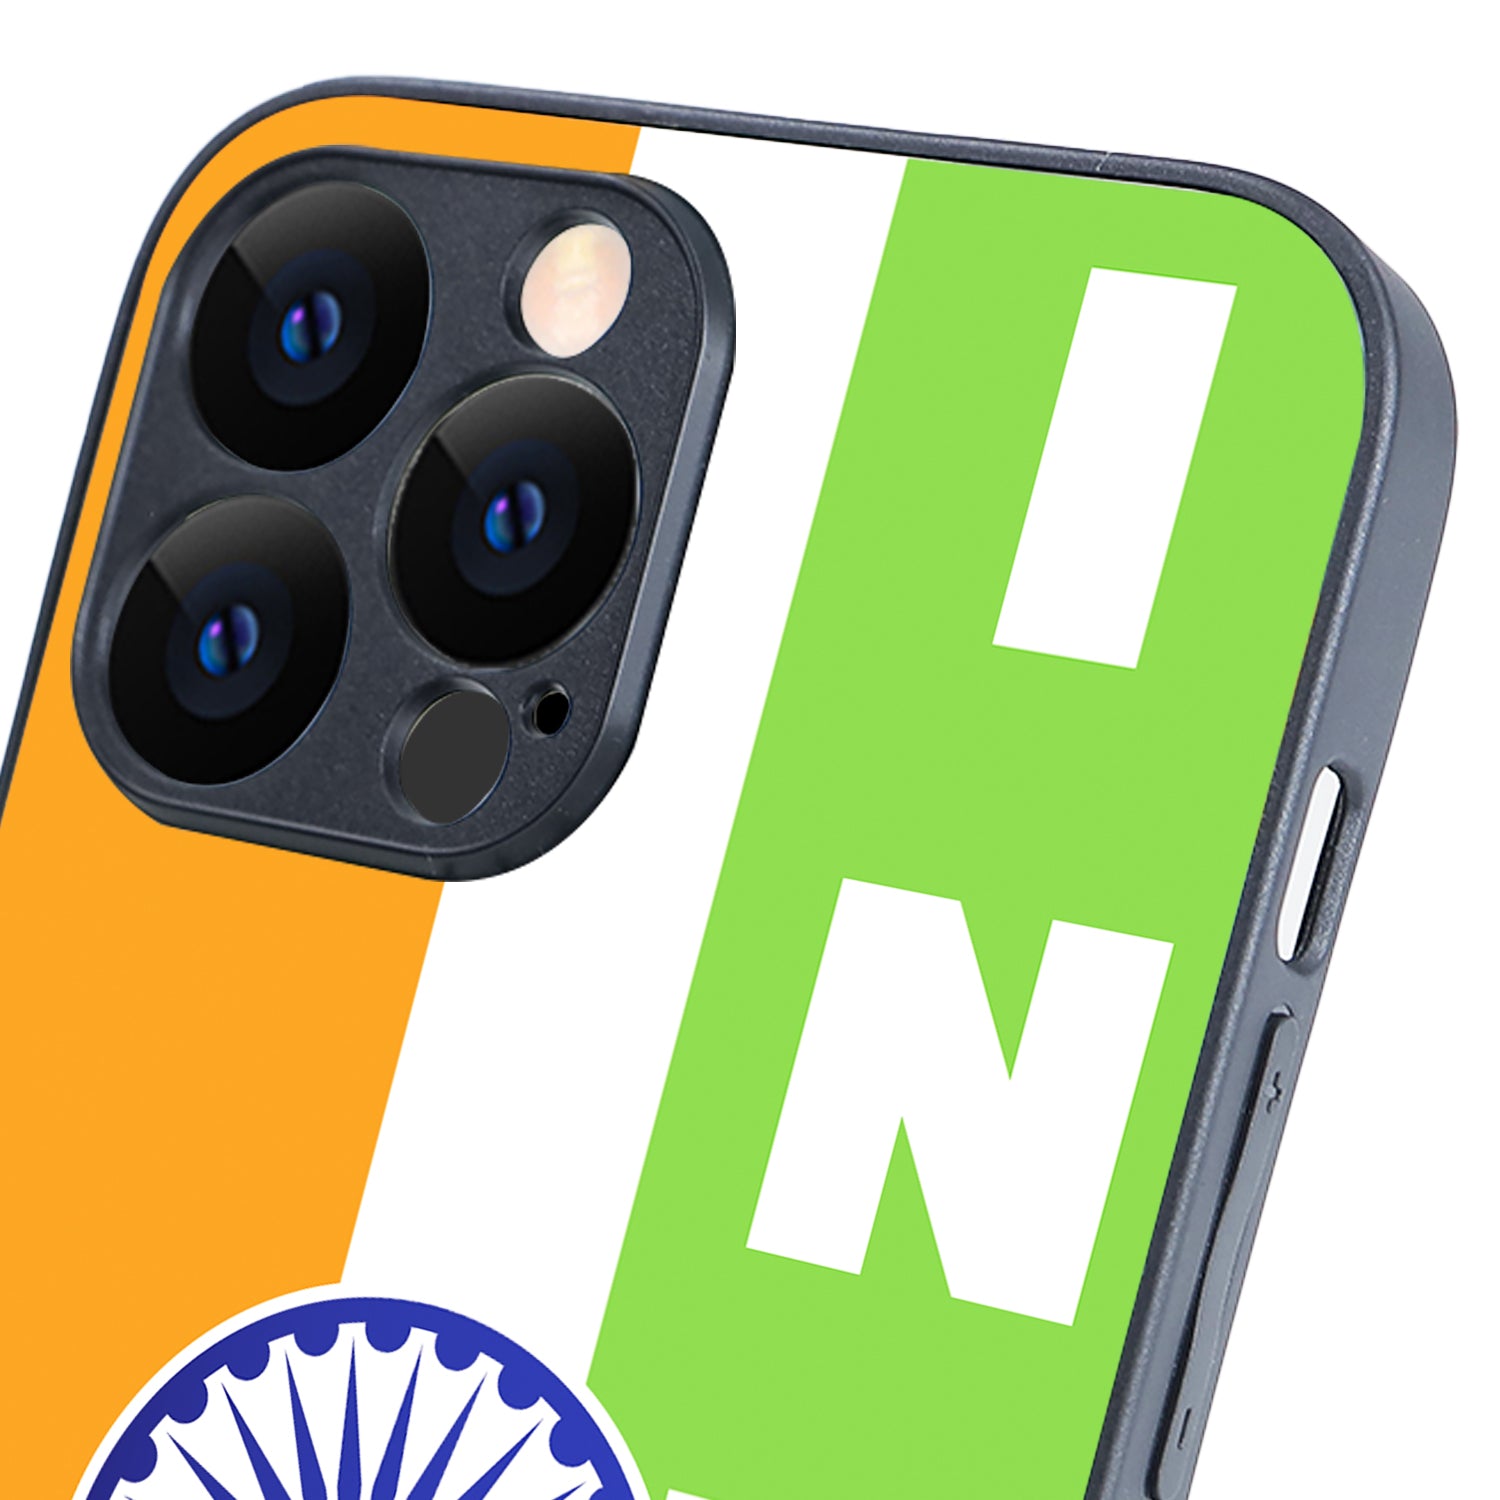 National Flag Indian iPhone 13 Pro Max Case